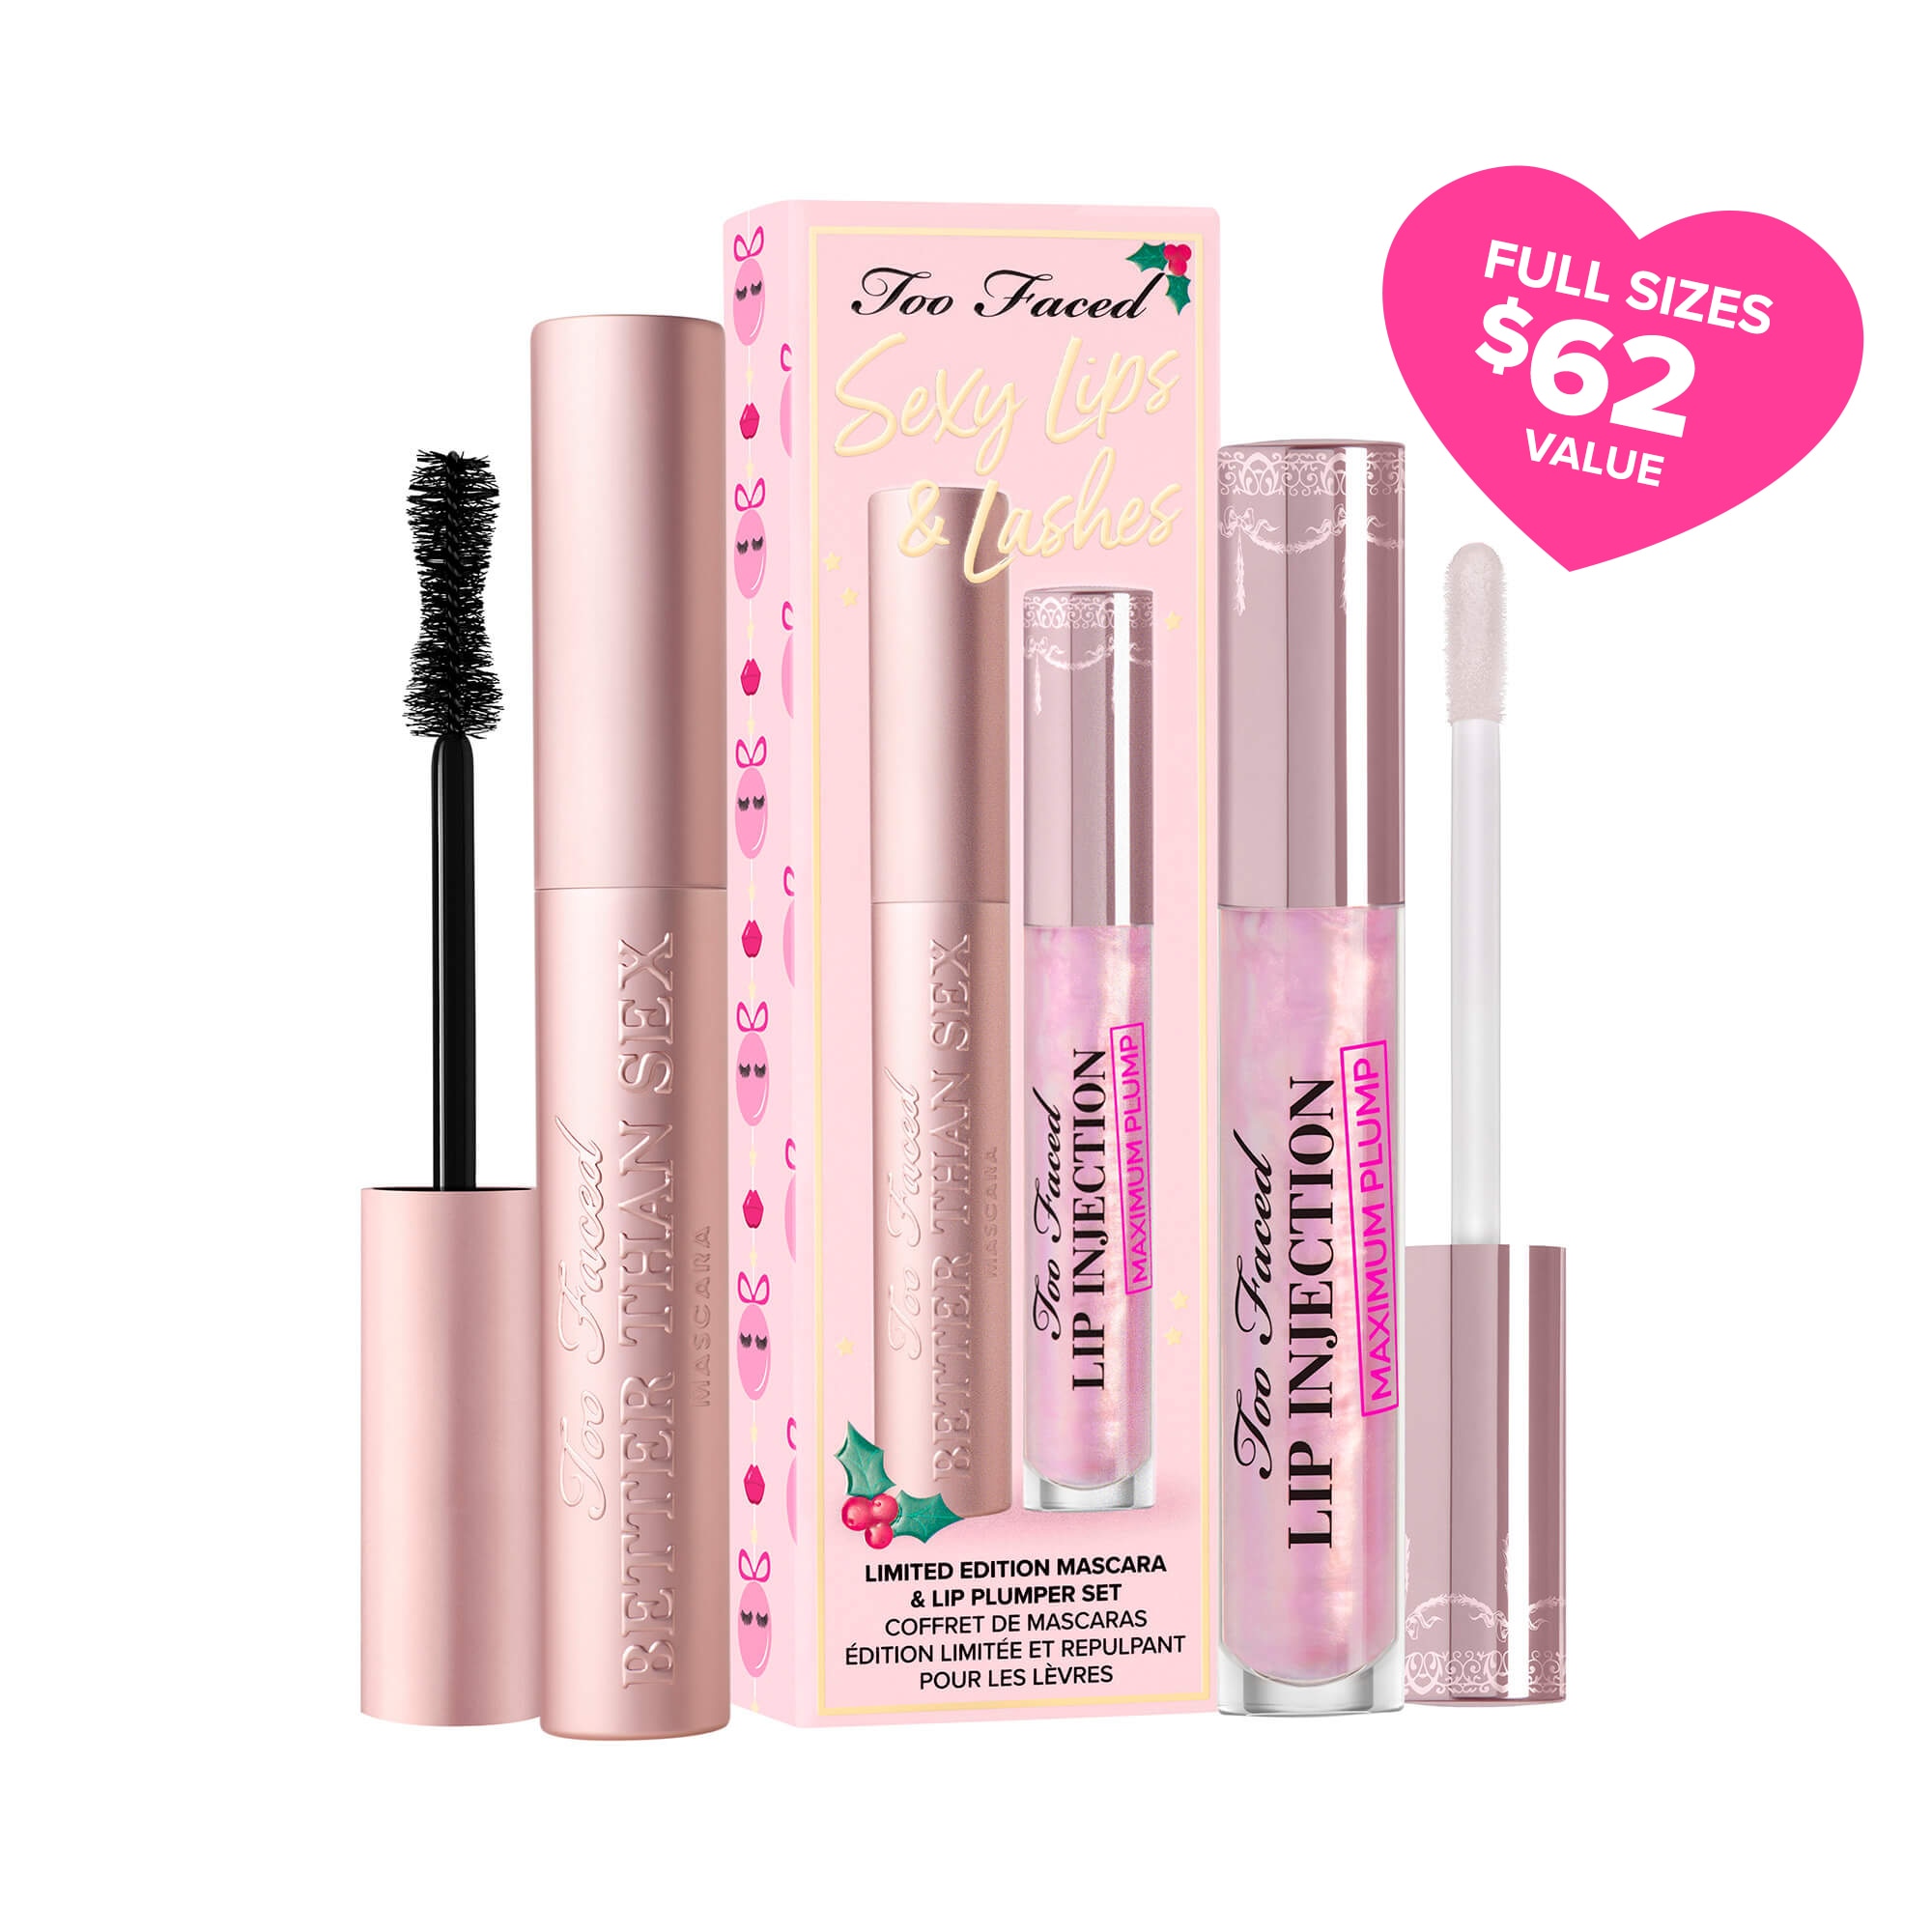 Two-Piece Limited Edition Mascara and Lip Plumper Set